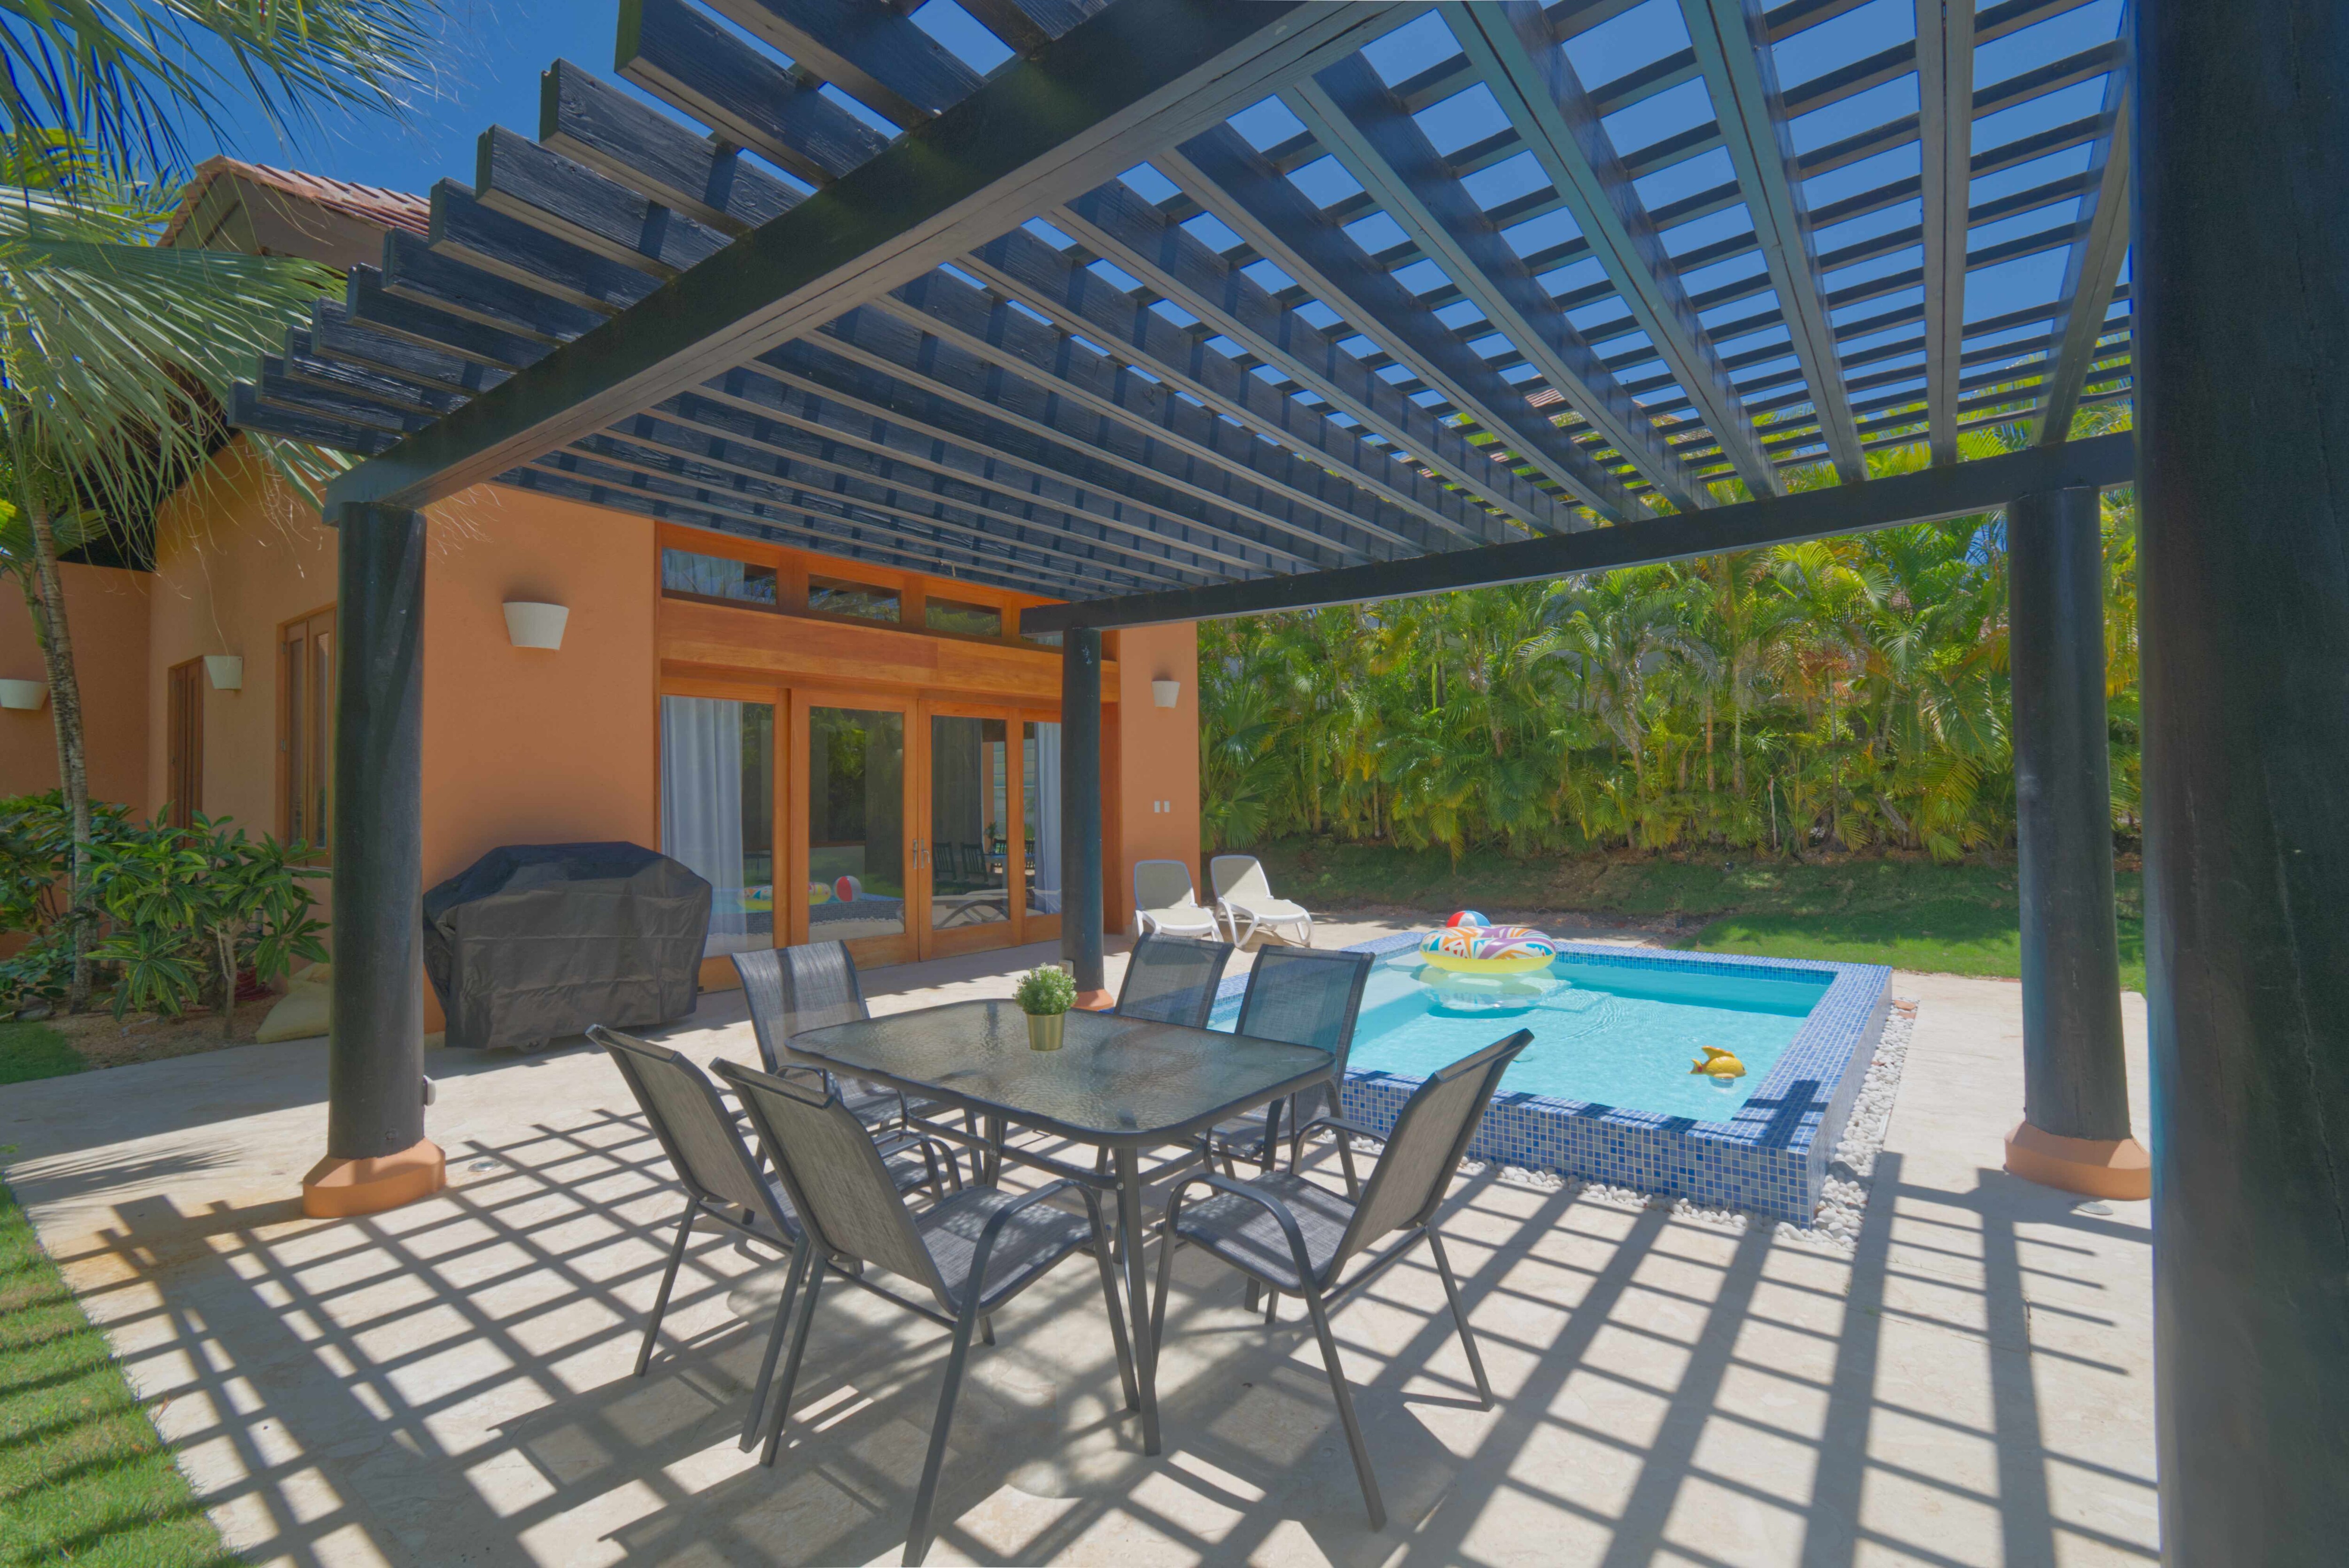 Property Image 1 - Cozy bungalow in the heart of Cap Cana, perfect for couples or small families